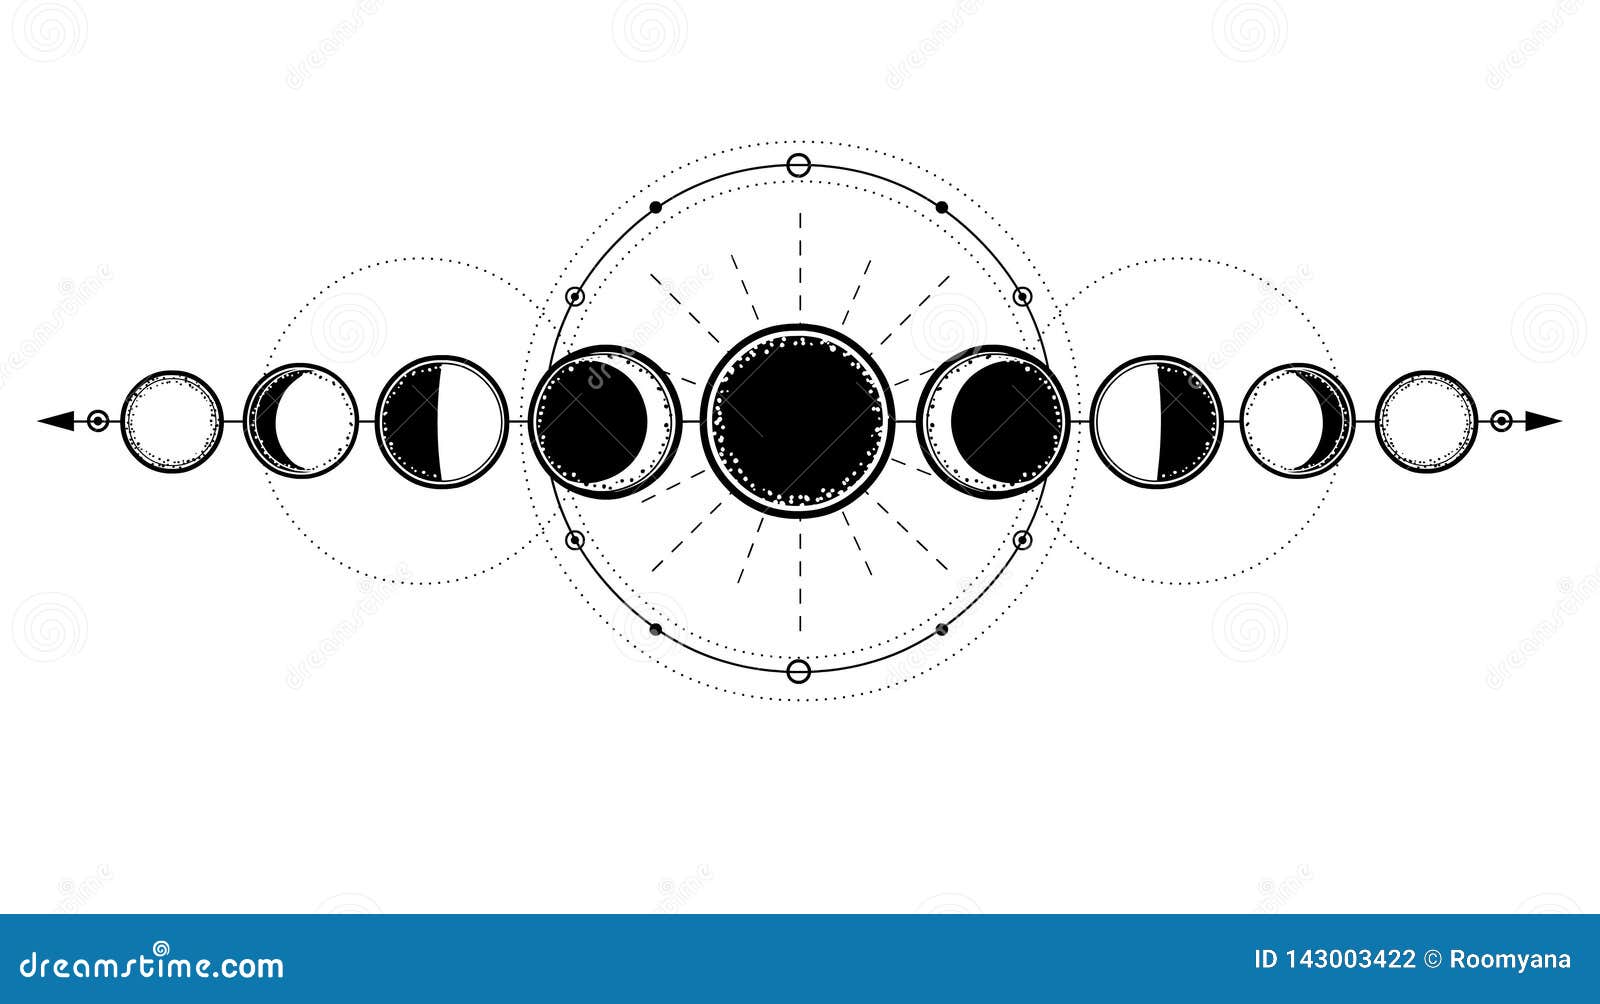 Mystical Drawing Phases Of The Moon Energy Circles Sacred Geometry